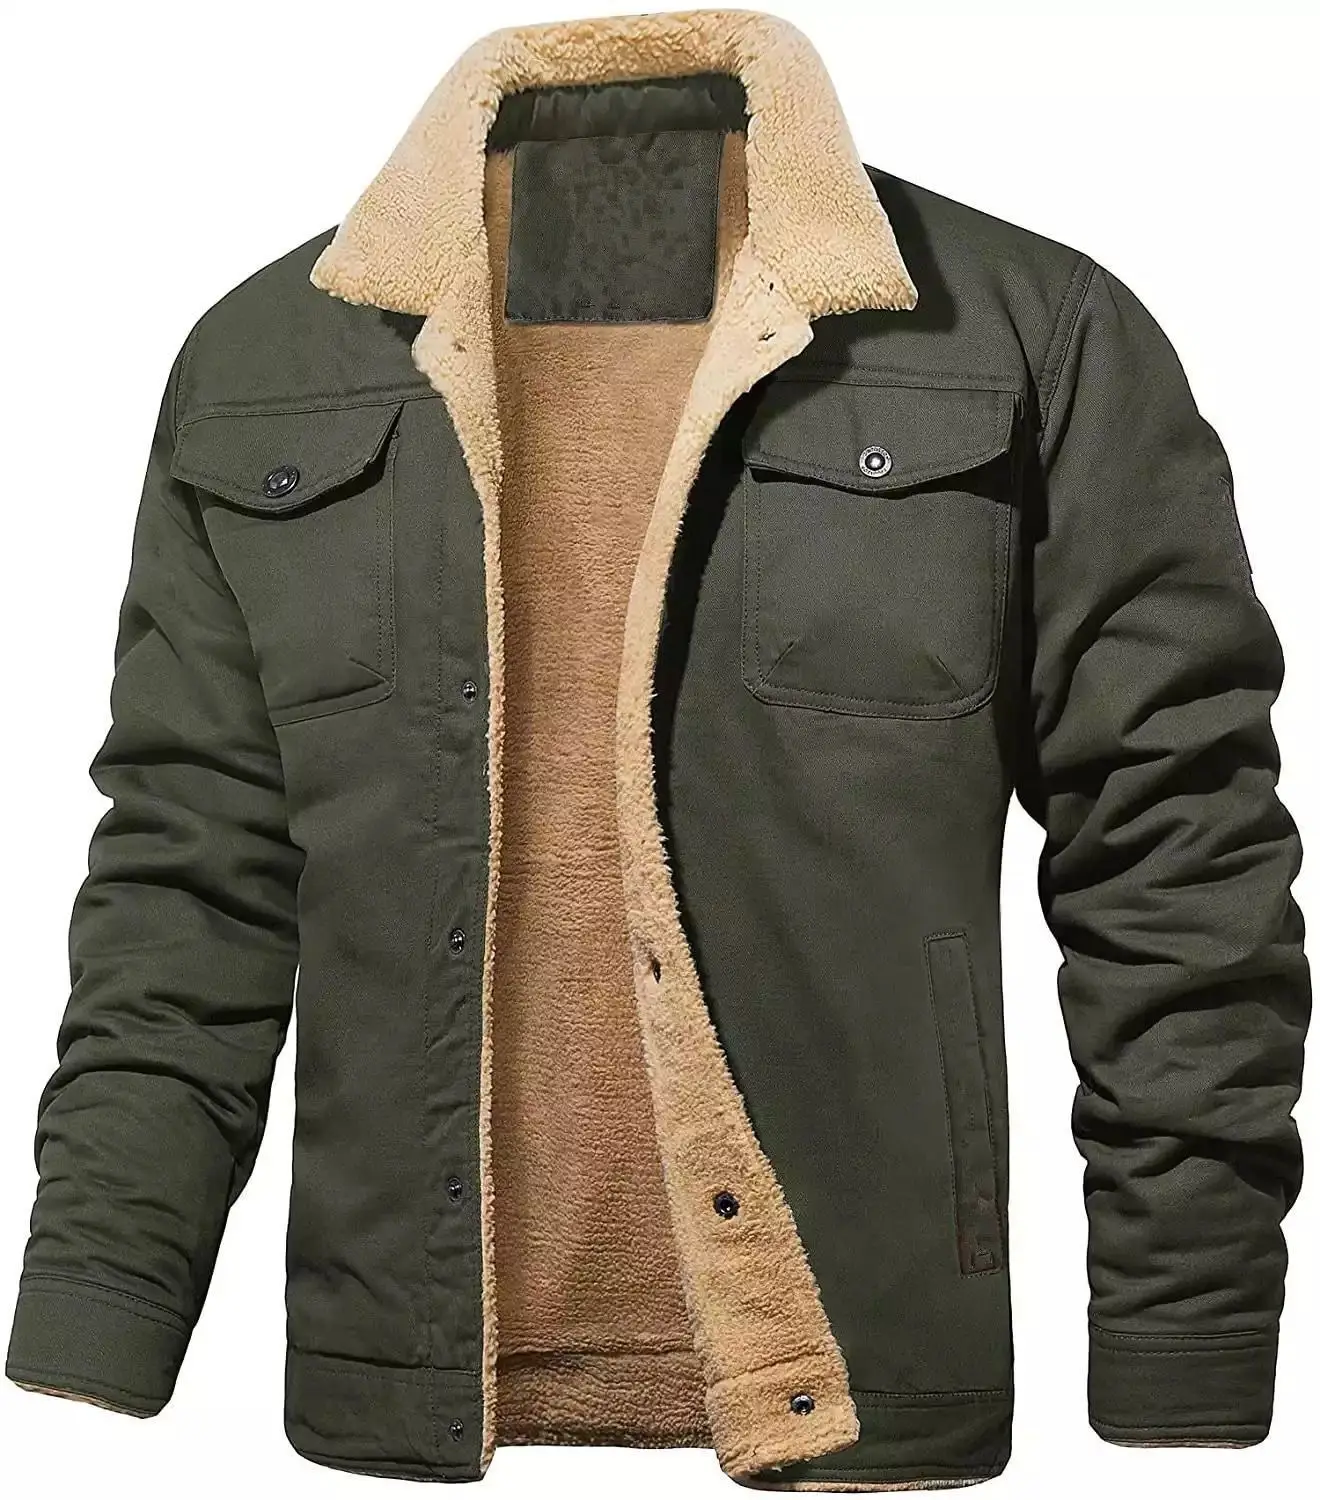 Autumn and winter new plush men's jacket for outdoor warmth preservation, plush nickel coat